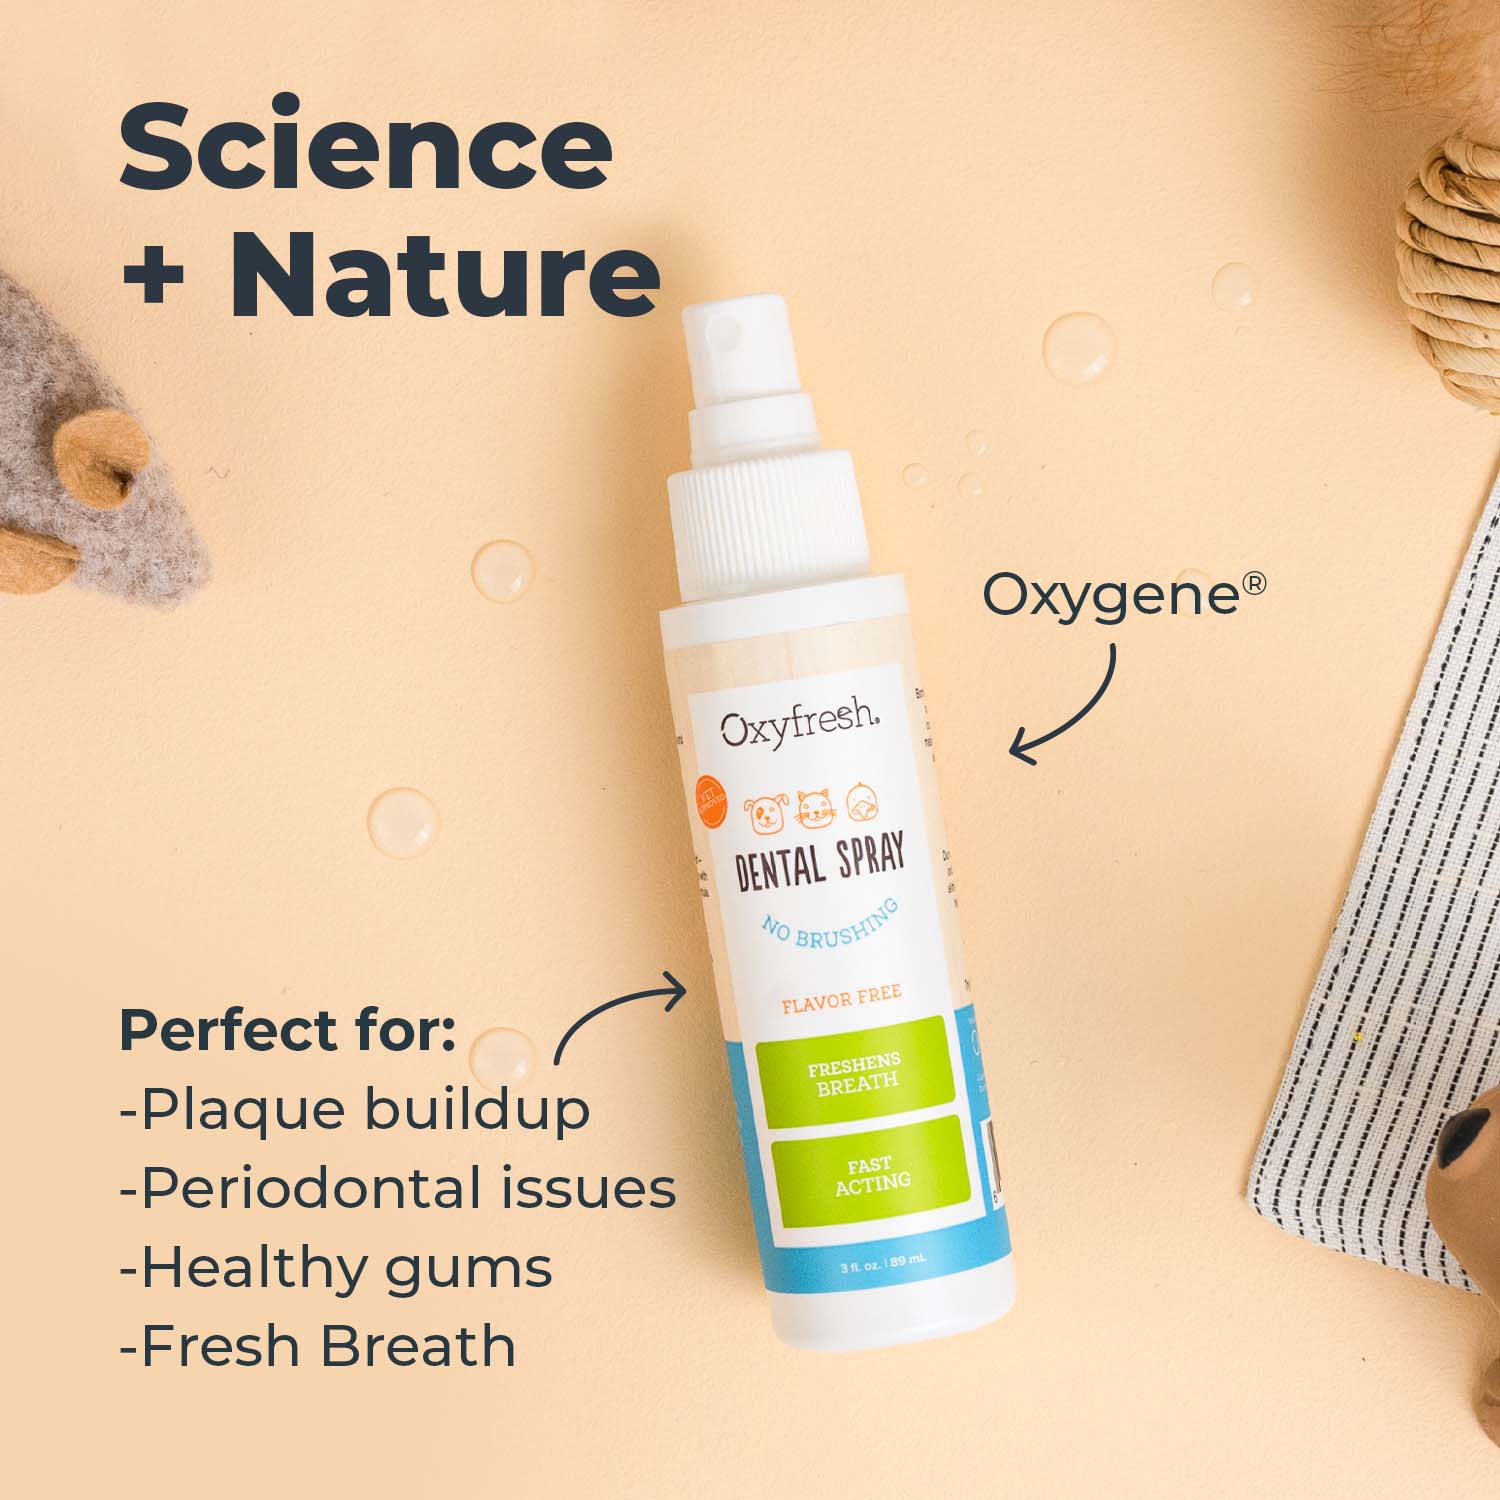 oxyfresh-cat-dog-dental-spray-perfect-for-plaque-buildup-periodontal-issues-healthy-gums-and-fresh-breath